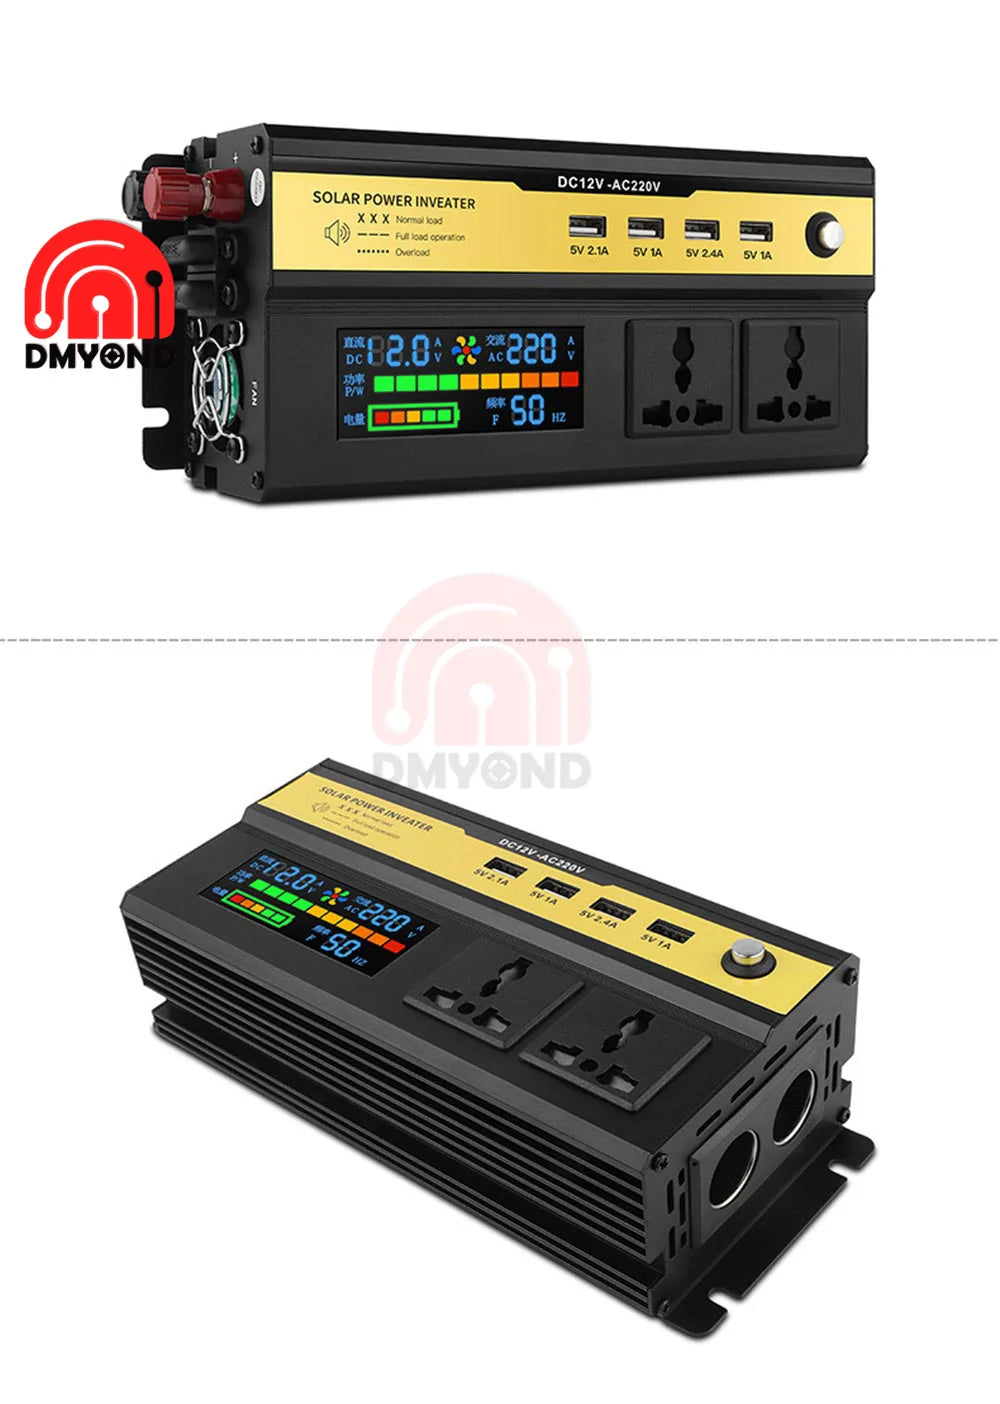 Portable inverter converts DC power to AC, suitable for solar car charging and general use.